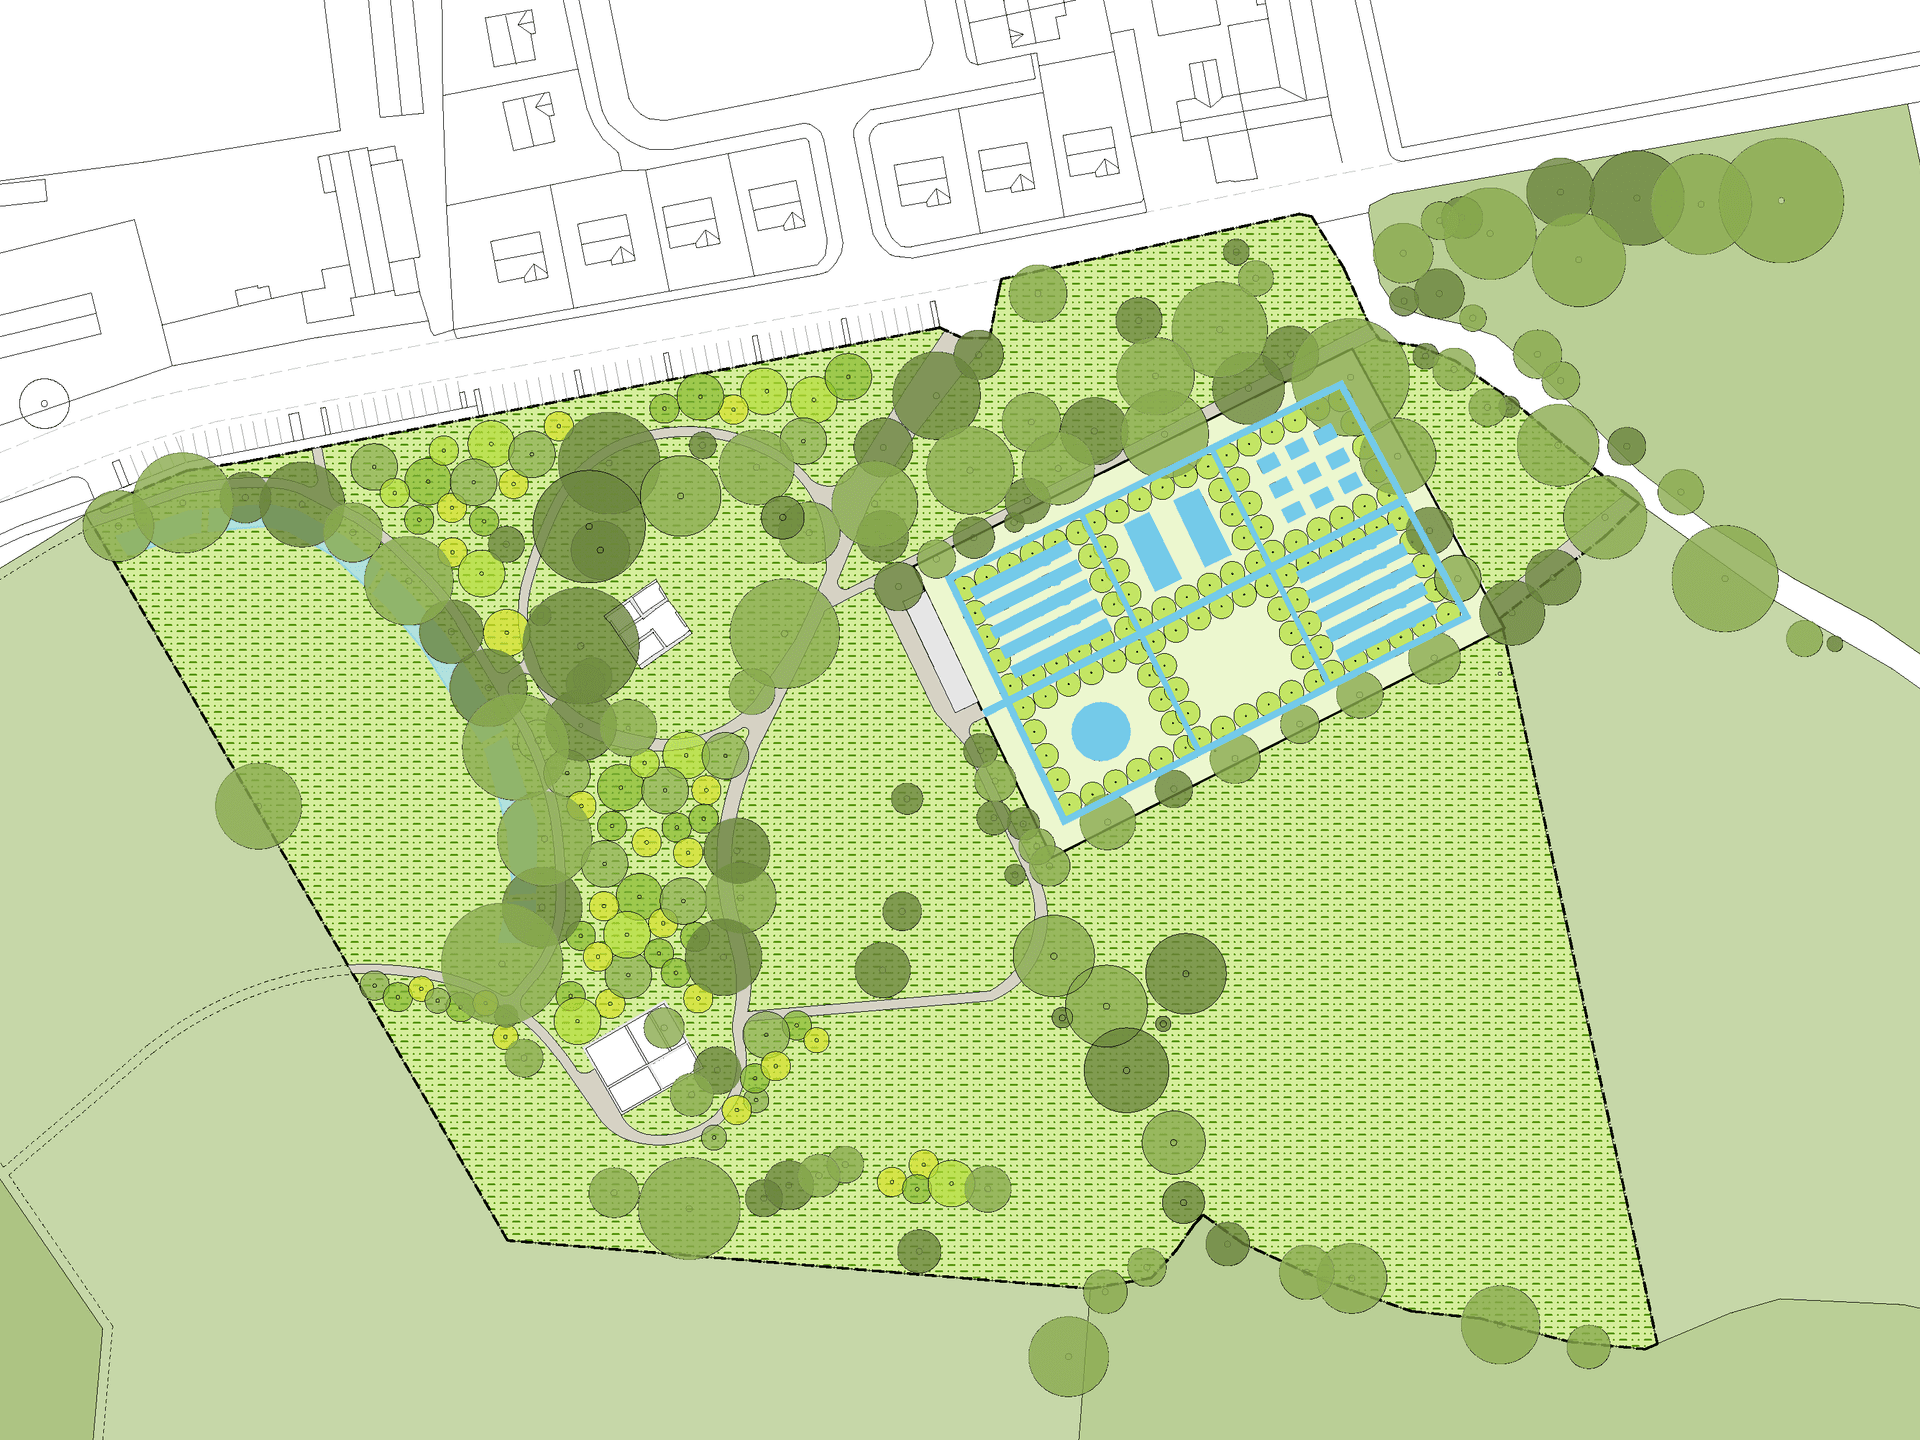 Establishing a new community orchard and garden using the 6 cell grid noted on historic maps allows incremental growth to meet demand and rotate crops.